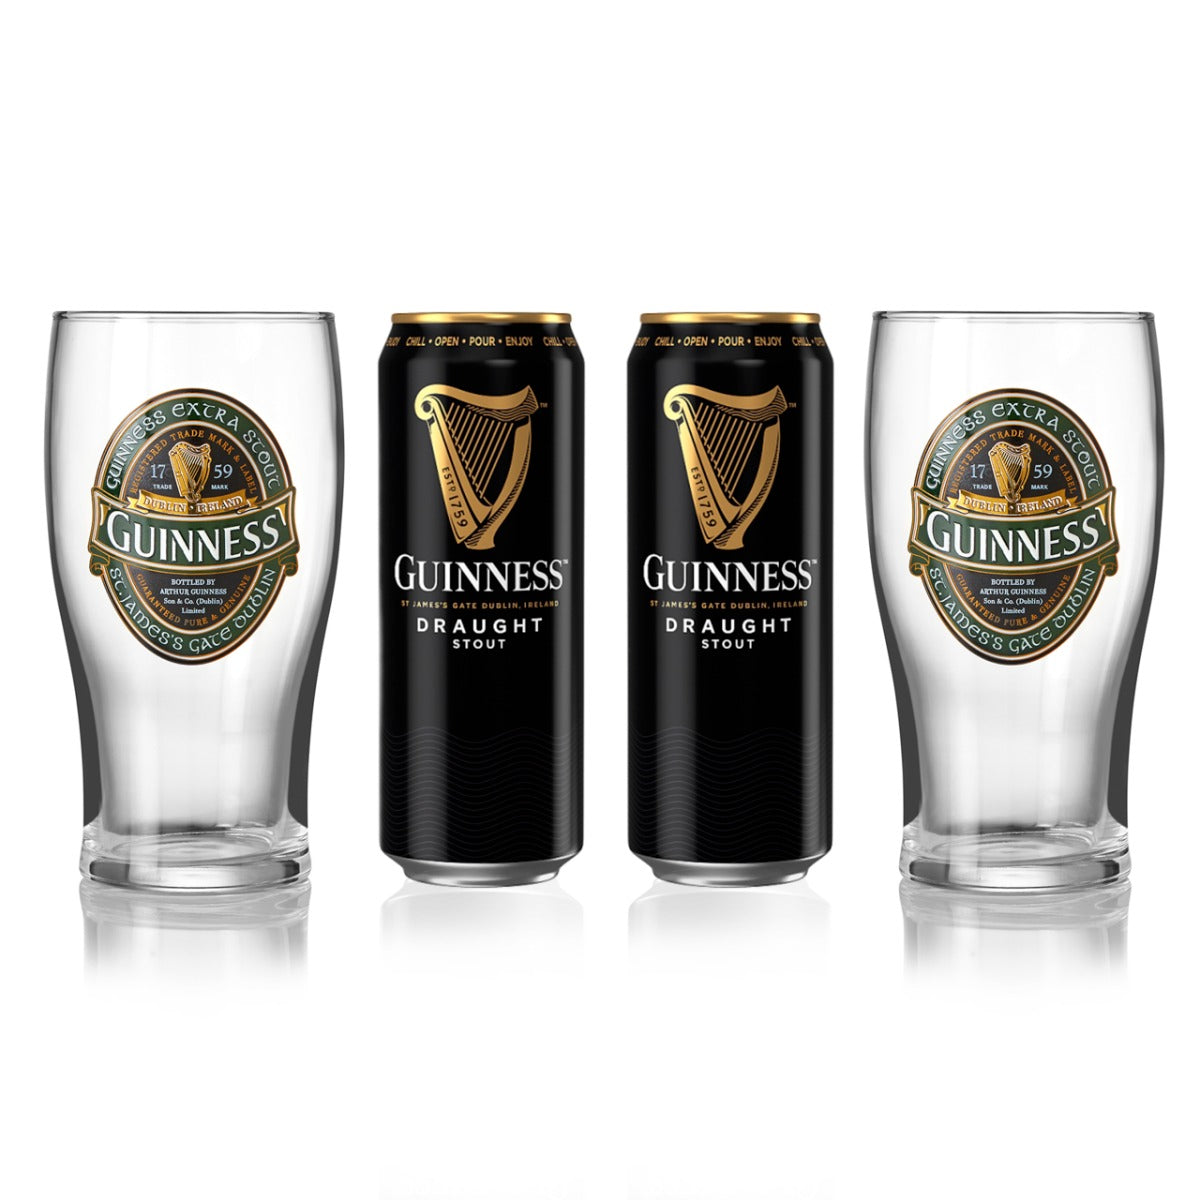 Guinness Ireland Collection - 2 Glasses and 2 Cans